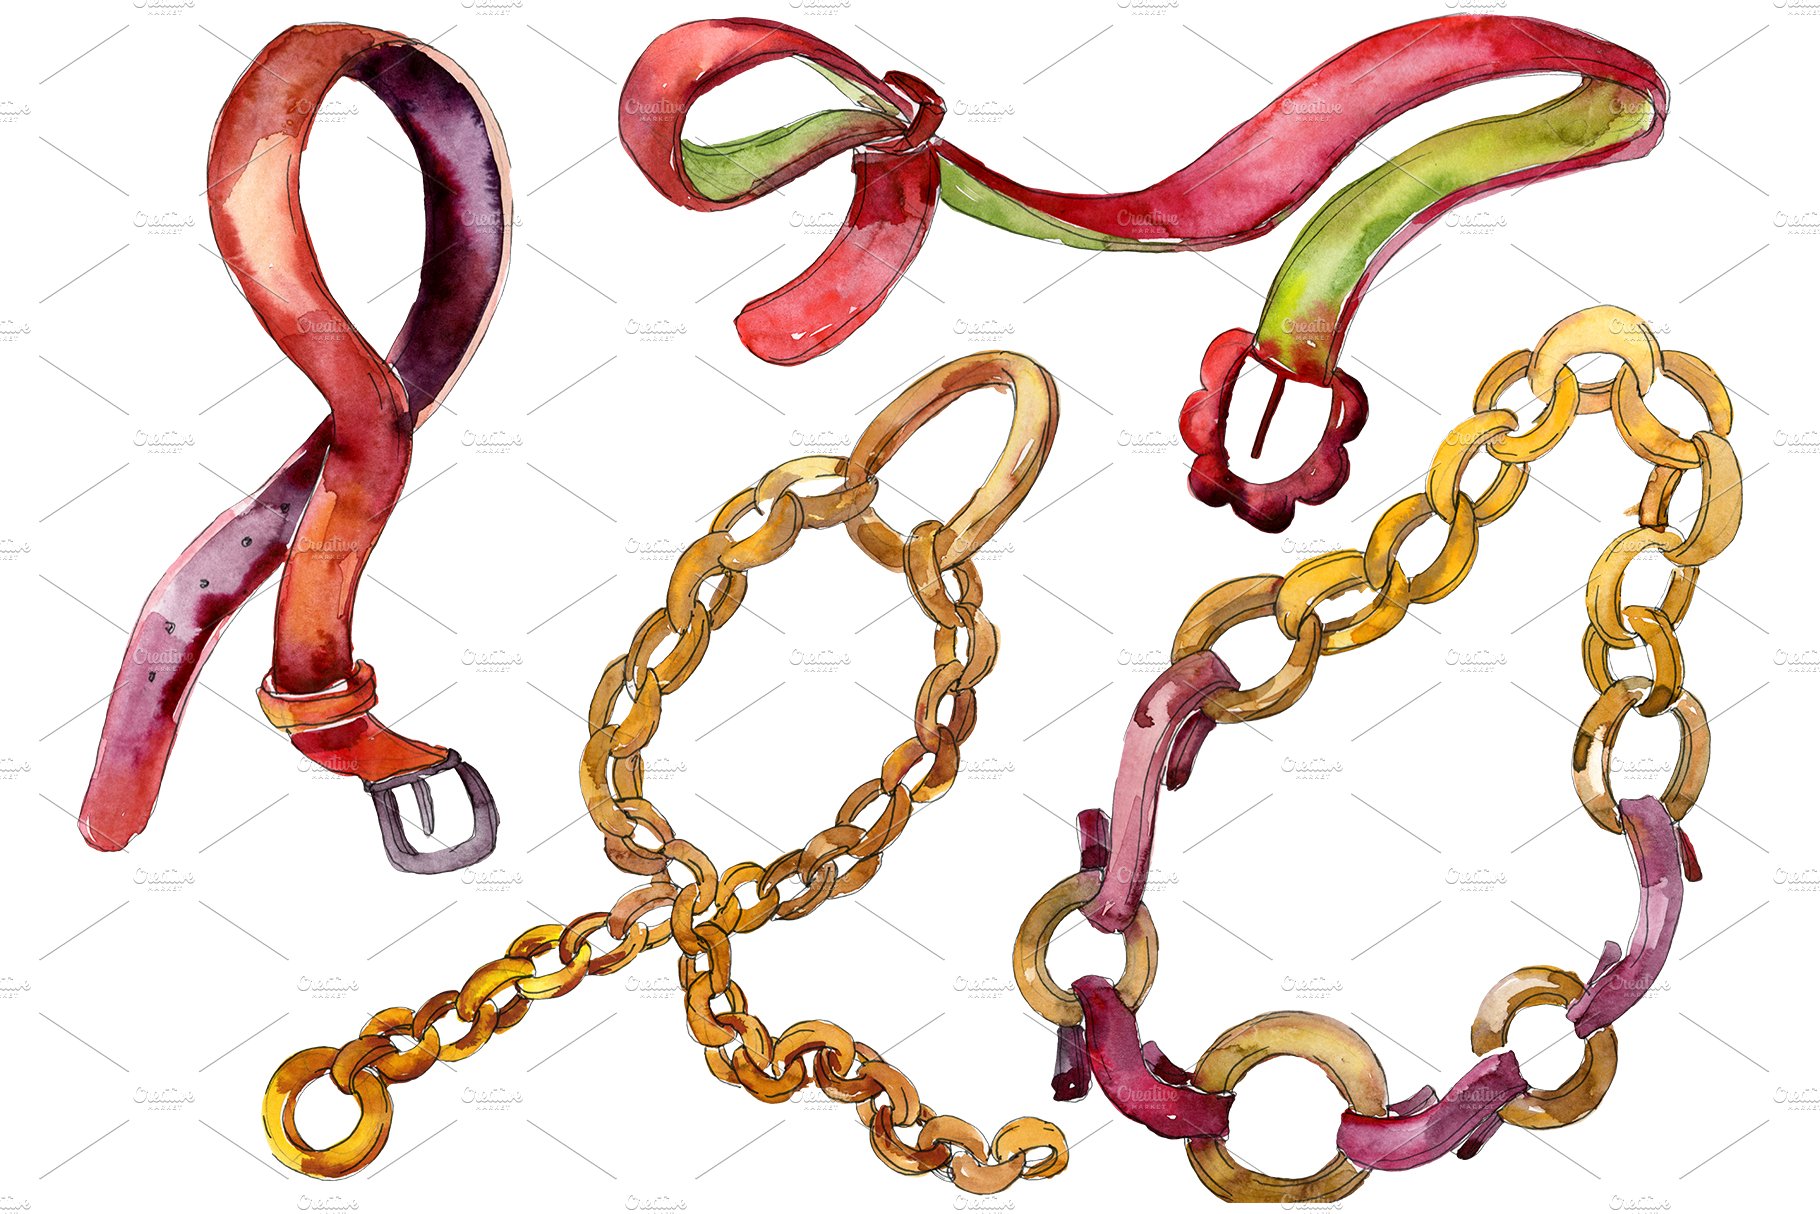 Stylish chains, leather belts cover image.